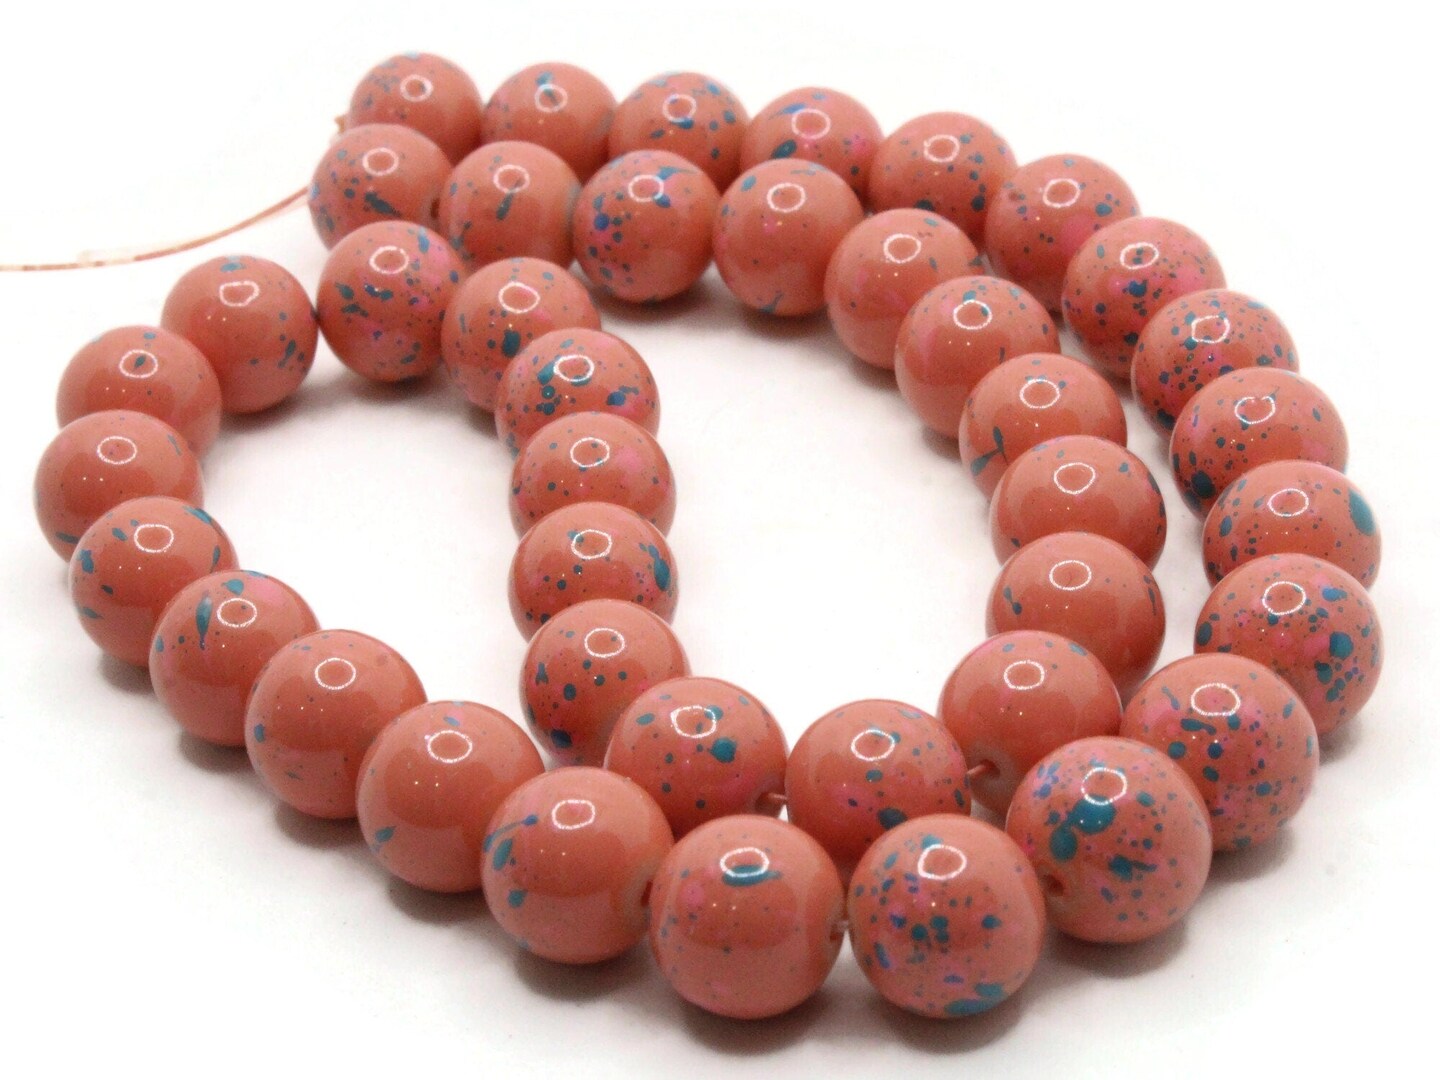 40 10mm Coral and Blue Splatter Paint Smooth Round Glass Beads